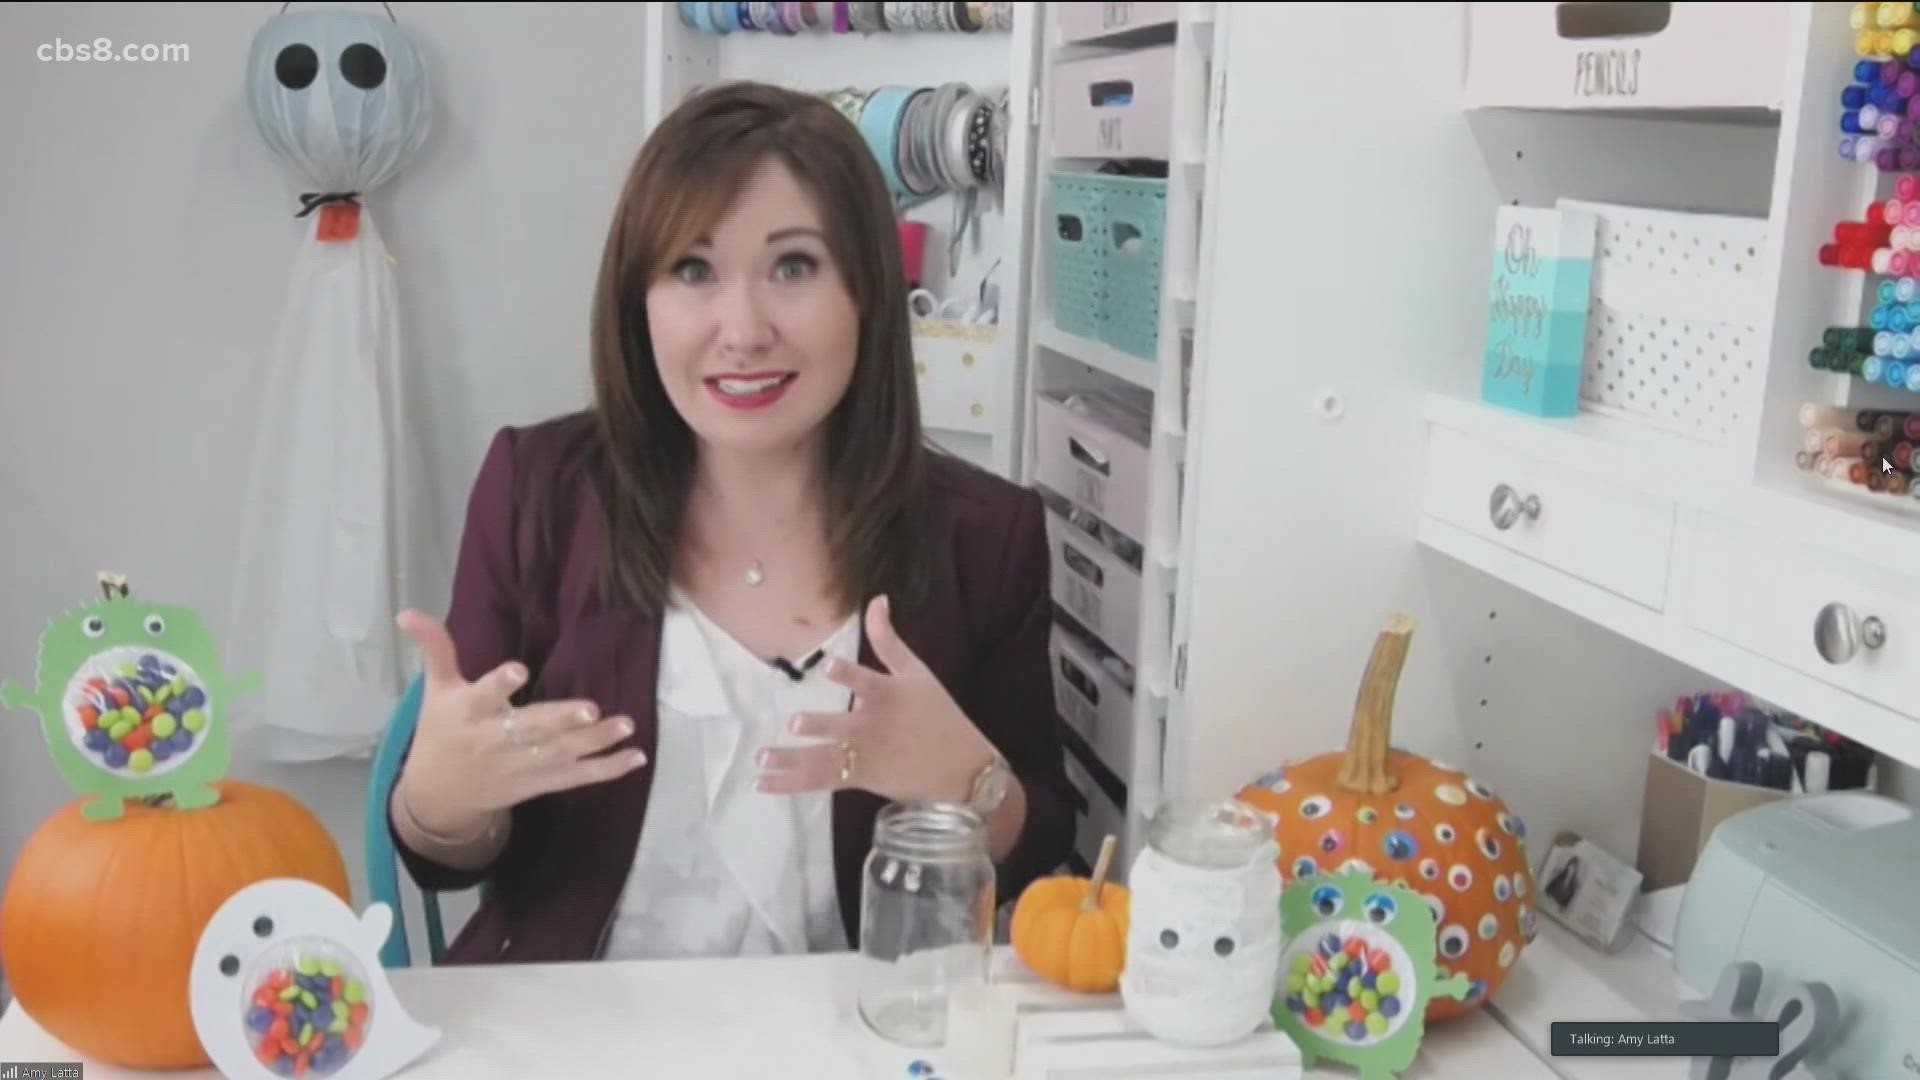 Author or crafty mom, Amy Latta joined Morning Extra to share her fun ideas you can do with the kids during Halloweentime!